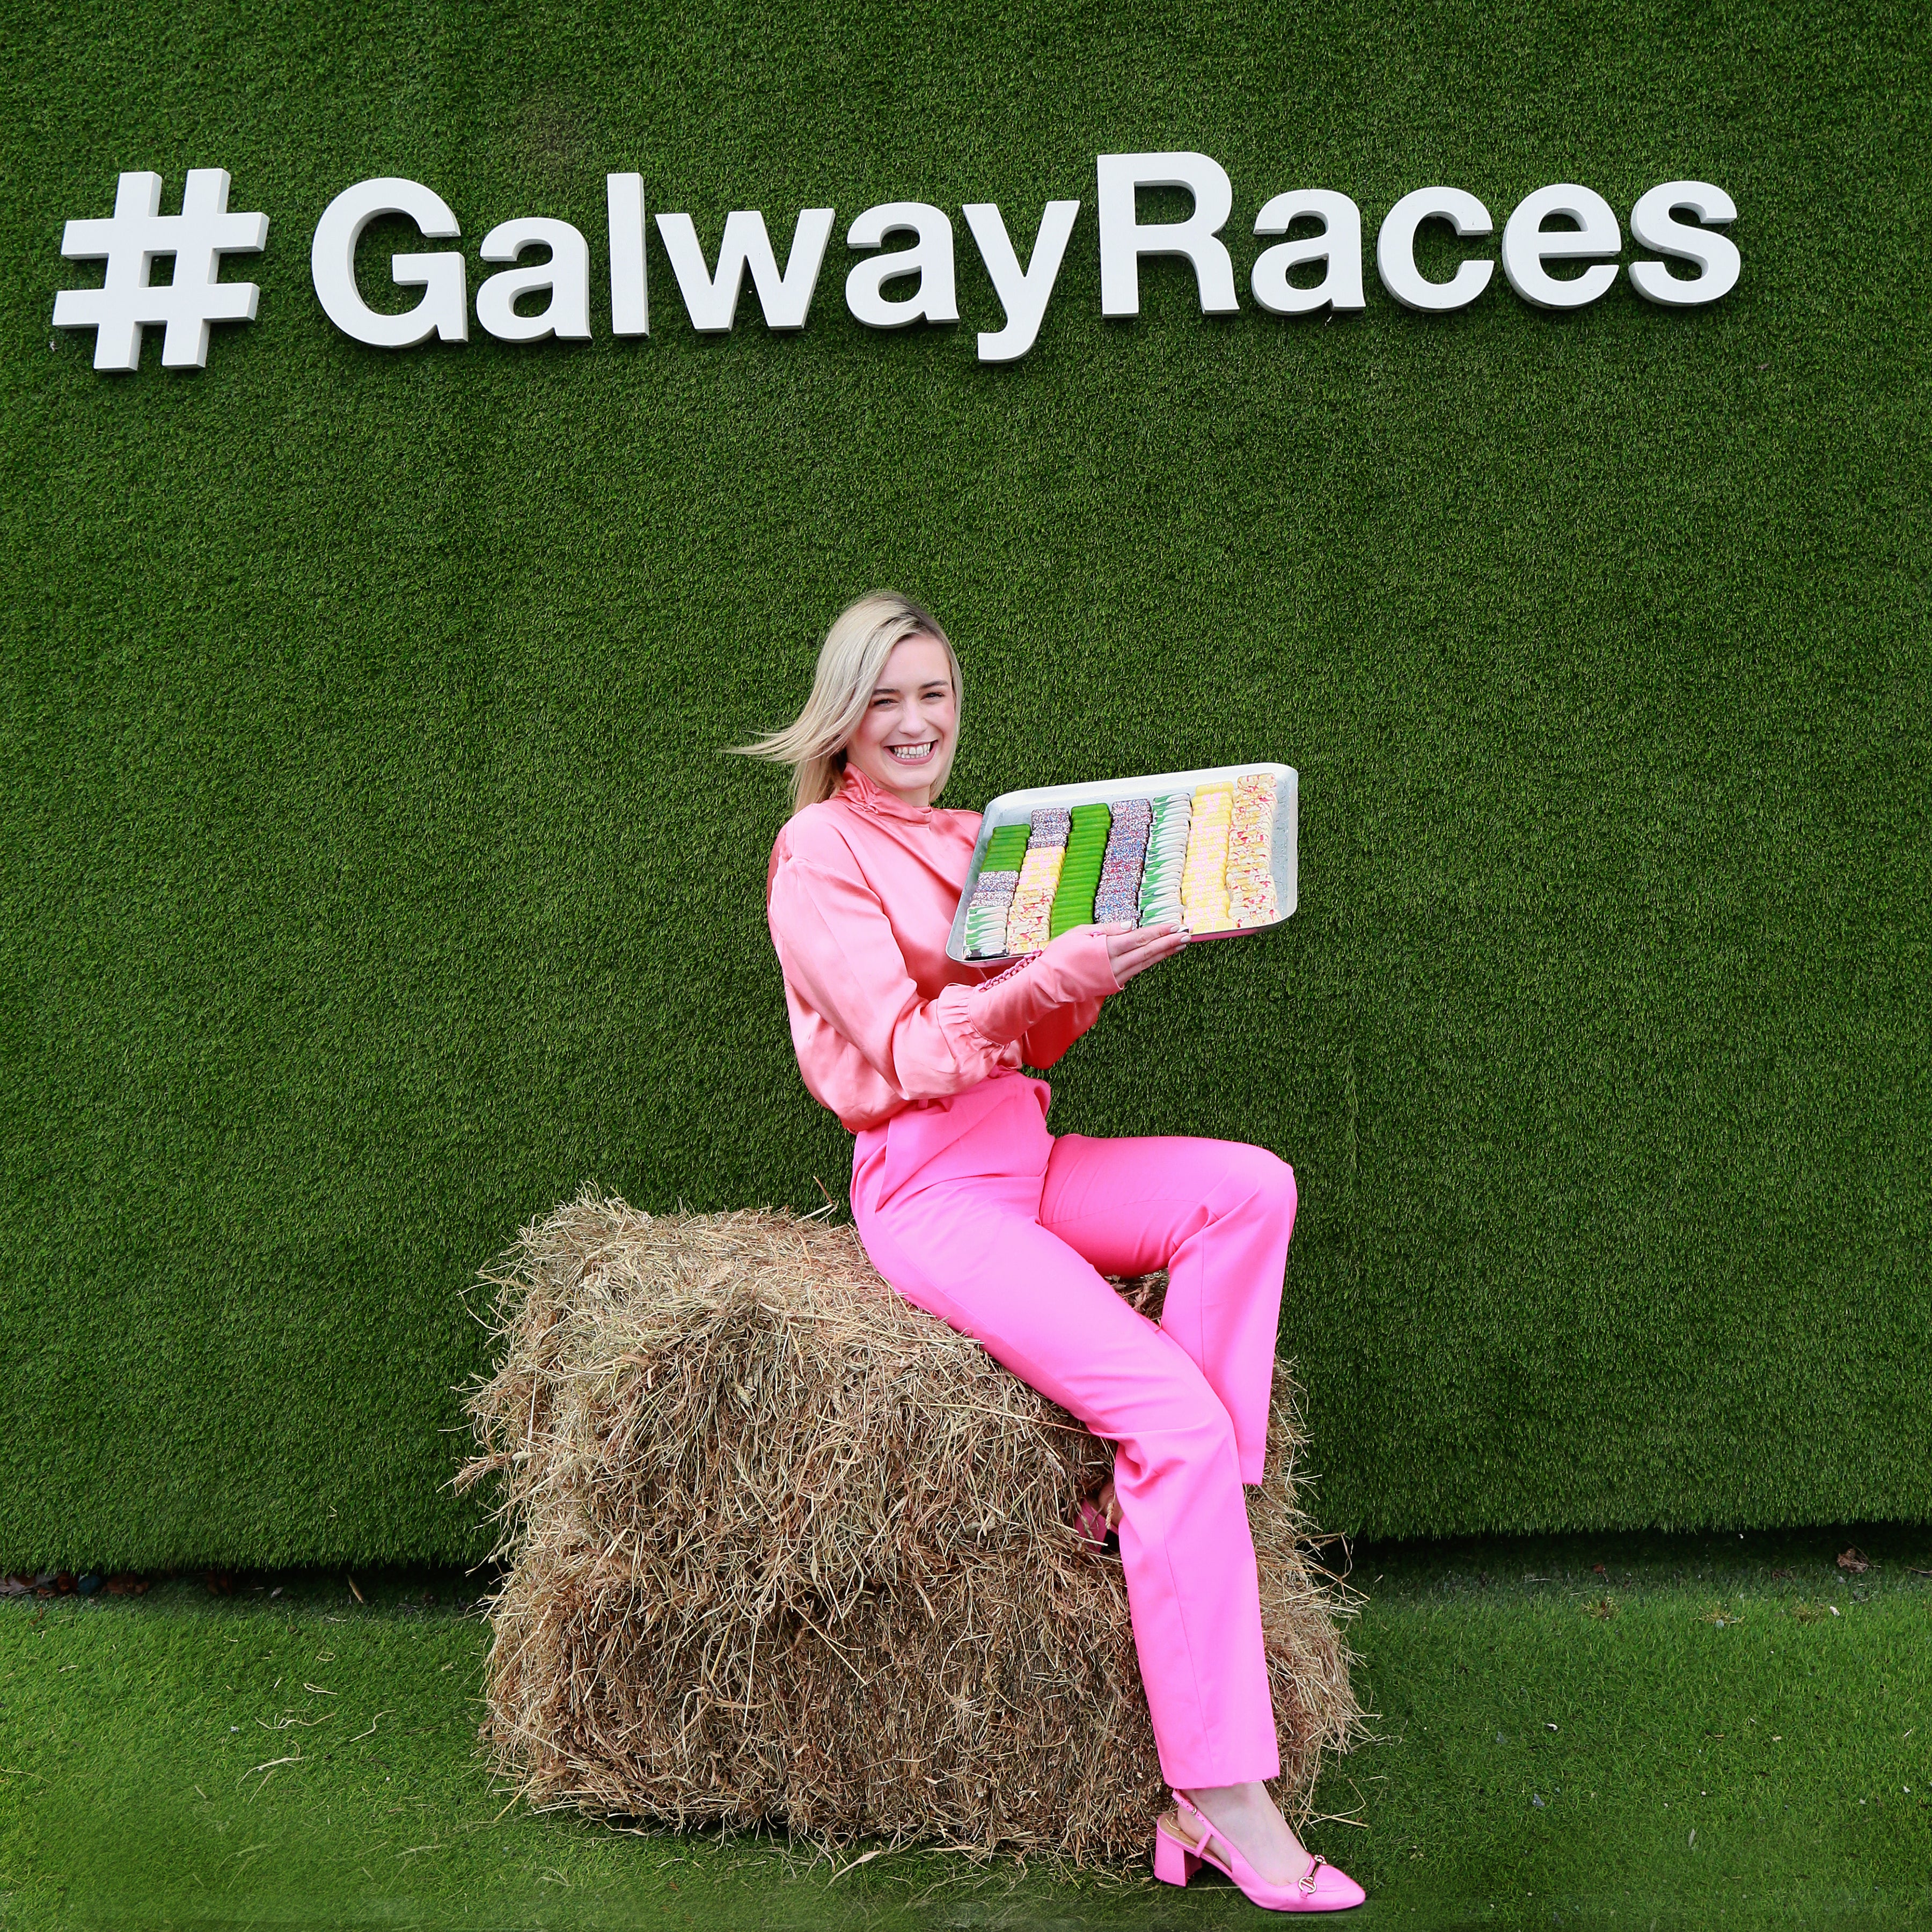 Galway Races Box